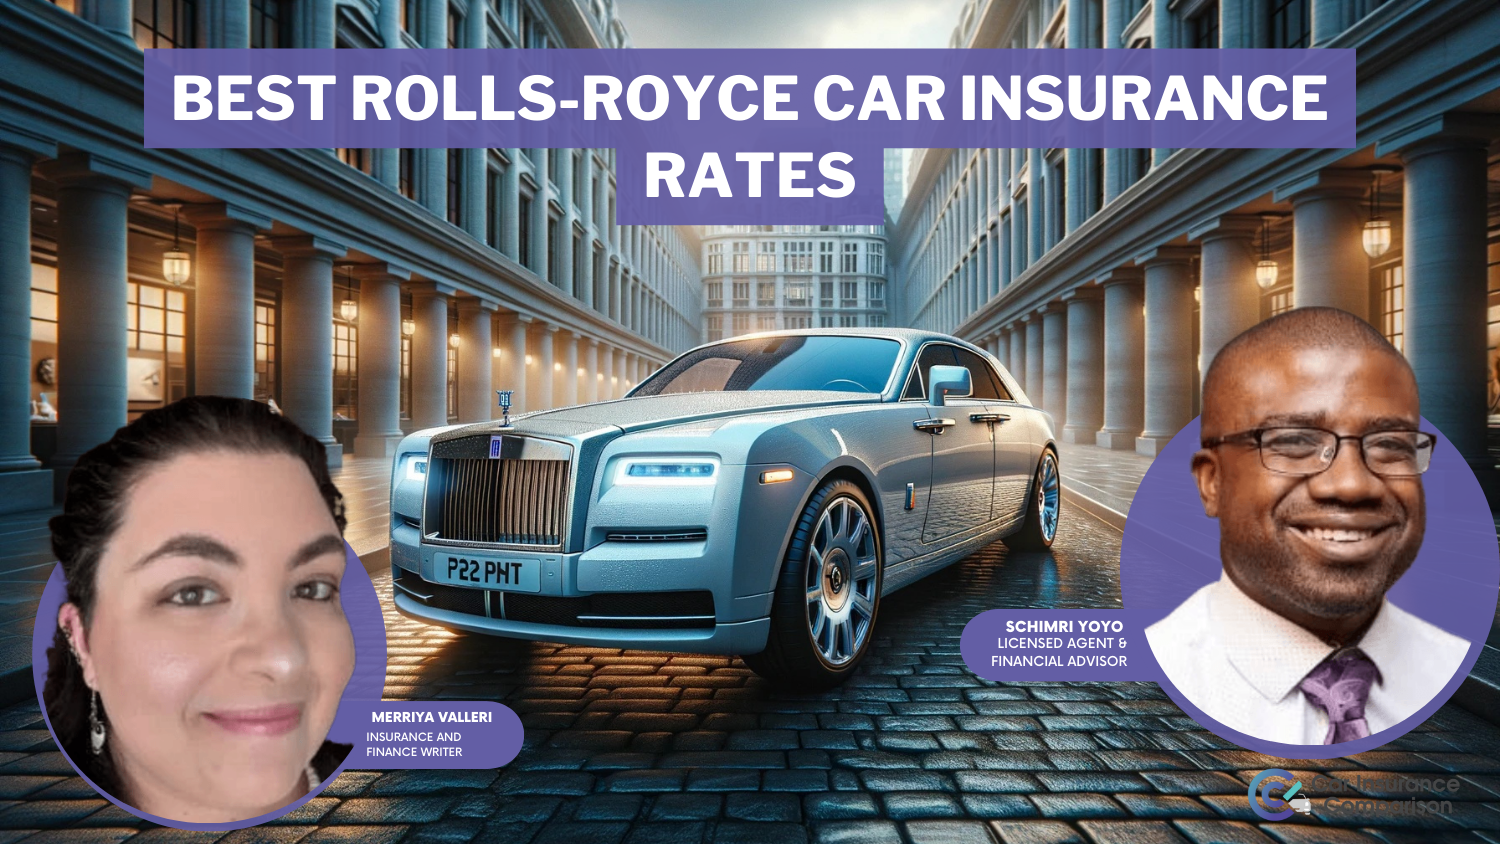 Best Rolls-Royce Car Insurance Rates: Allstate, USAA, Hagerty